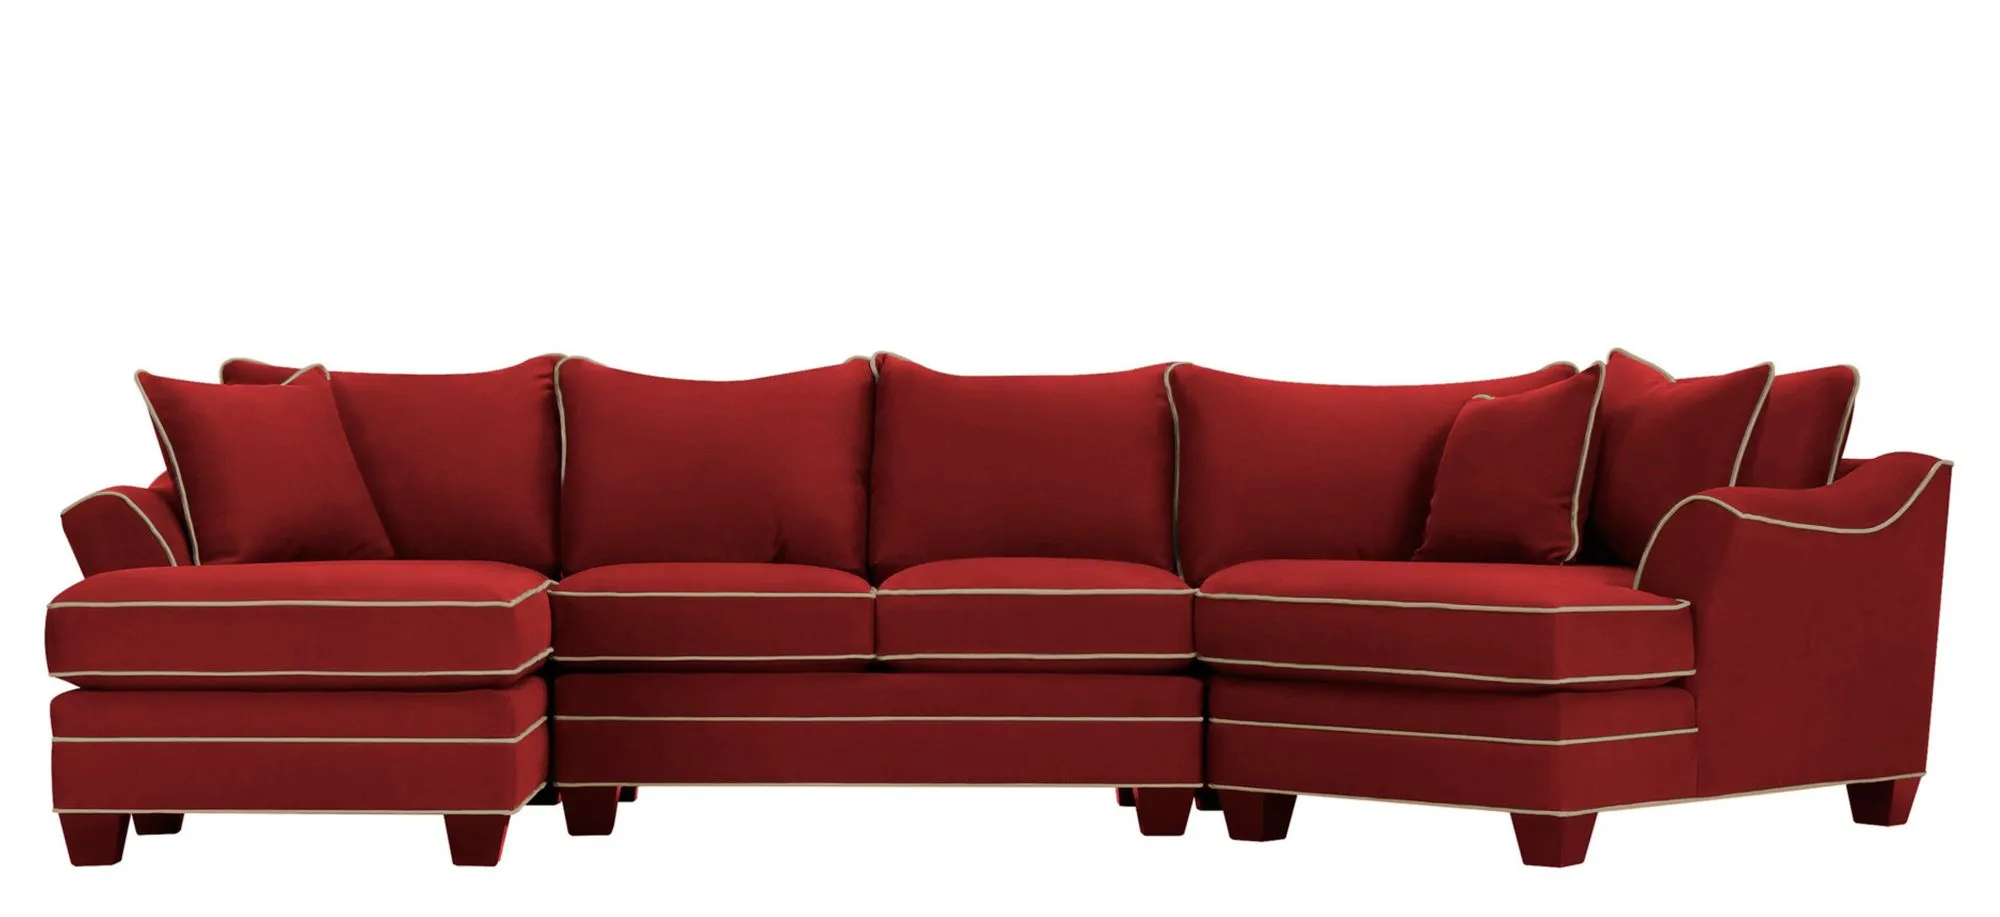 Foresthill 3-pc. Left Hand Facing Sectional Sofa in Suede So Soft Cardinal/Mineral by H.M. Richards